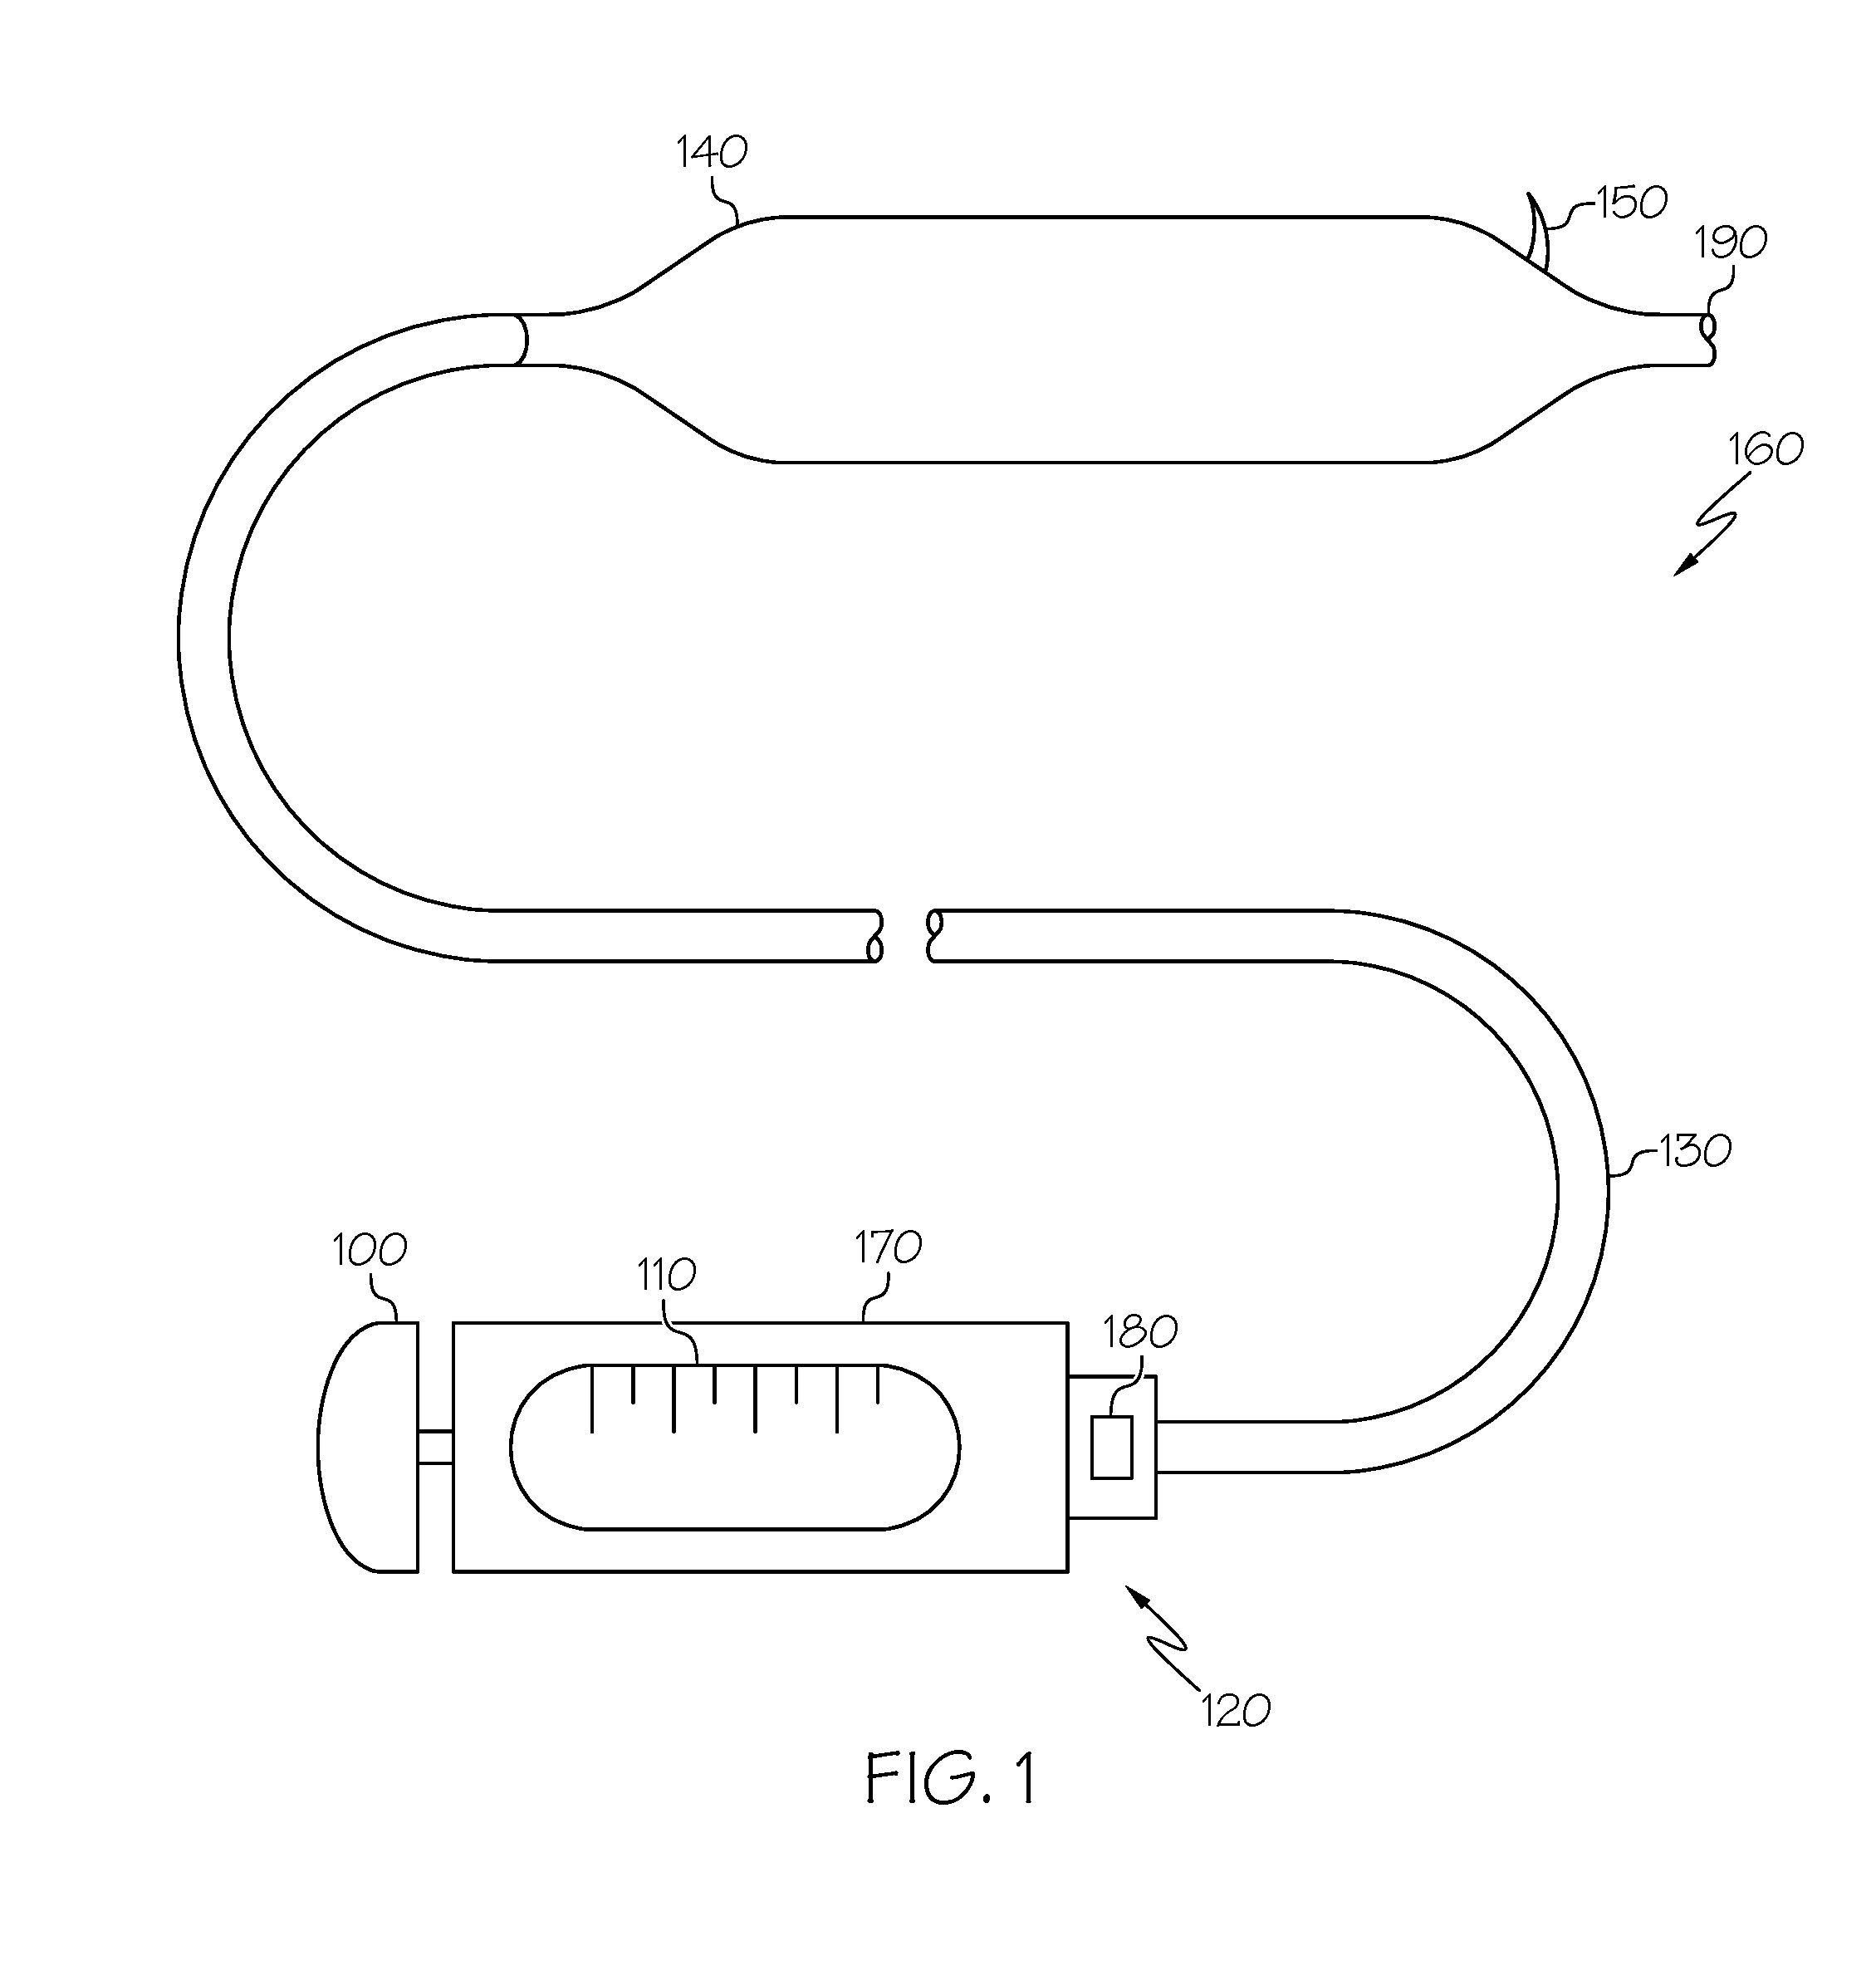 Intravascular catheter balloon device having a tool for atherectomy or an incising portion for atheromatous plaque scoring